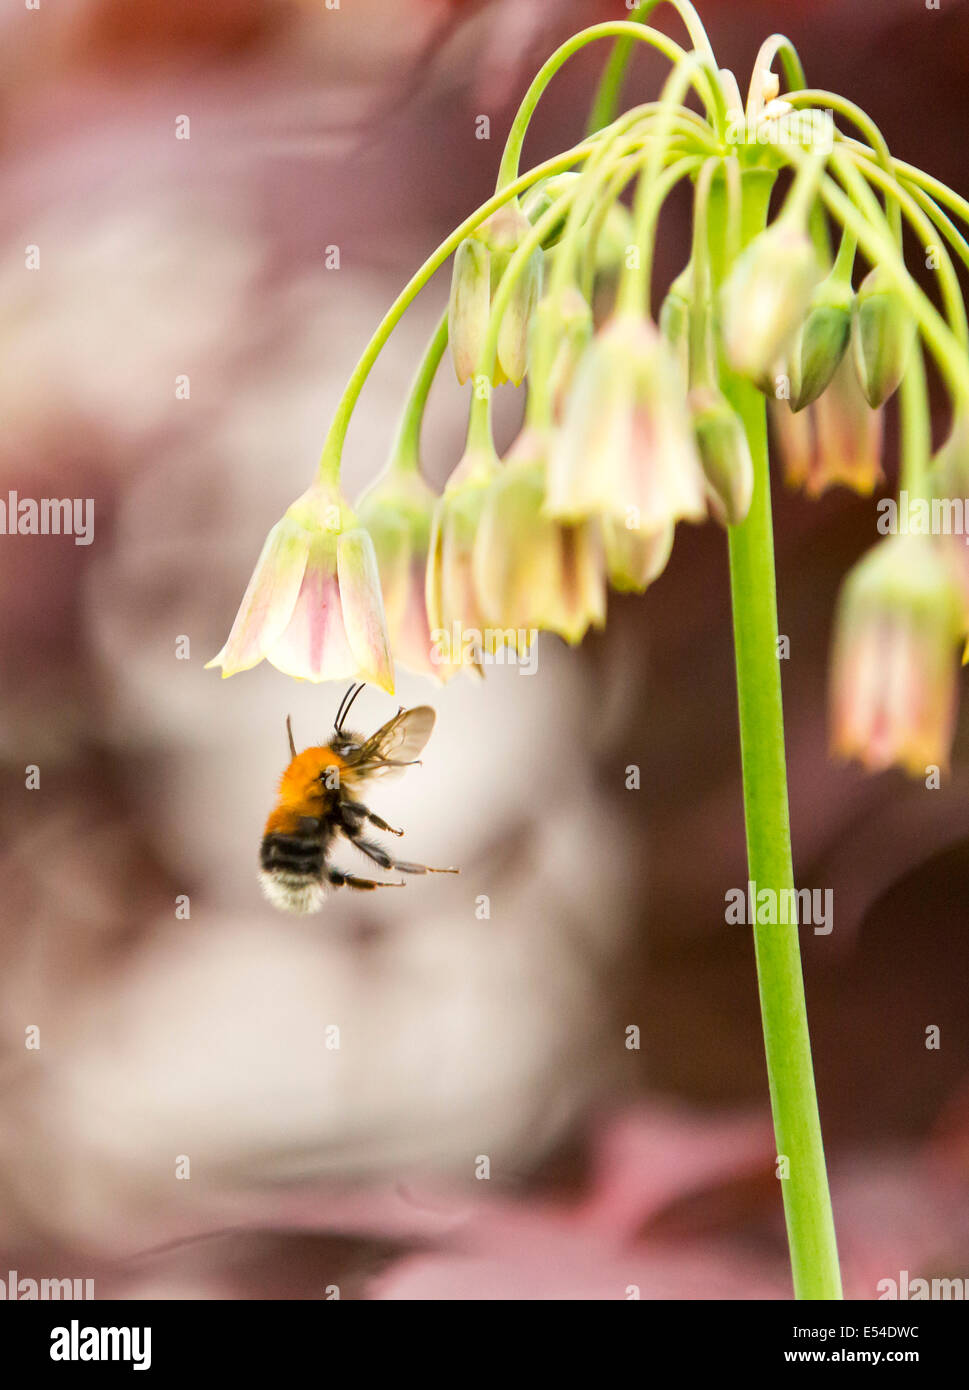 Bumble Bee gathering pollen from an Alium flower. Stock Photo